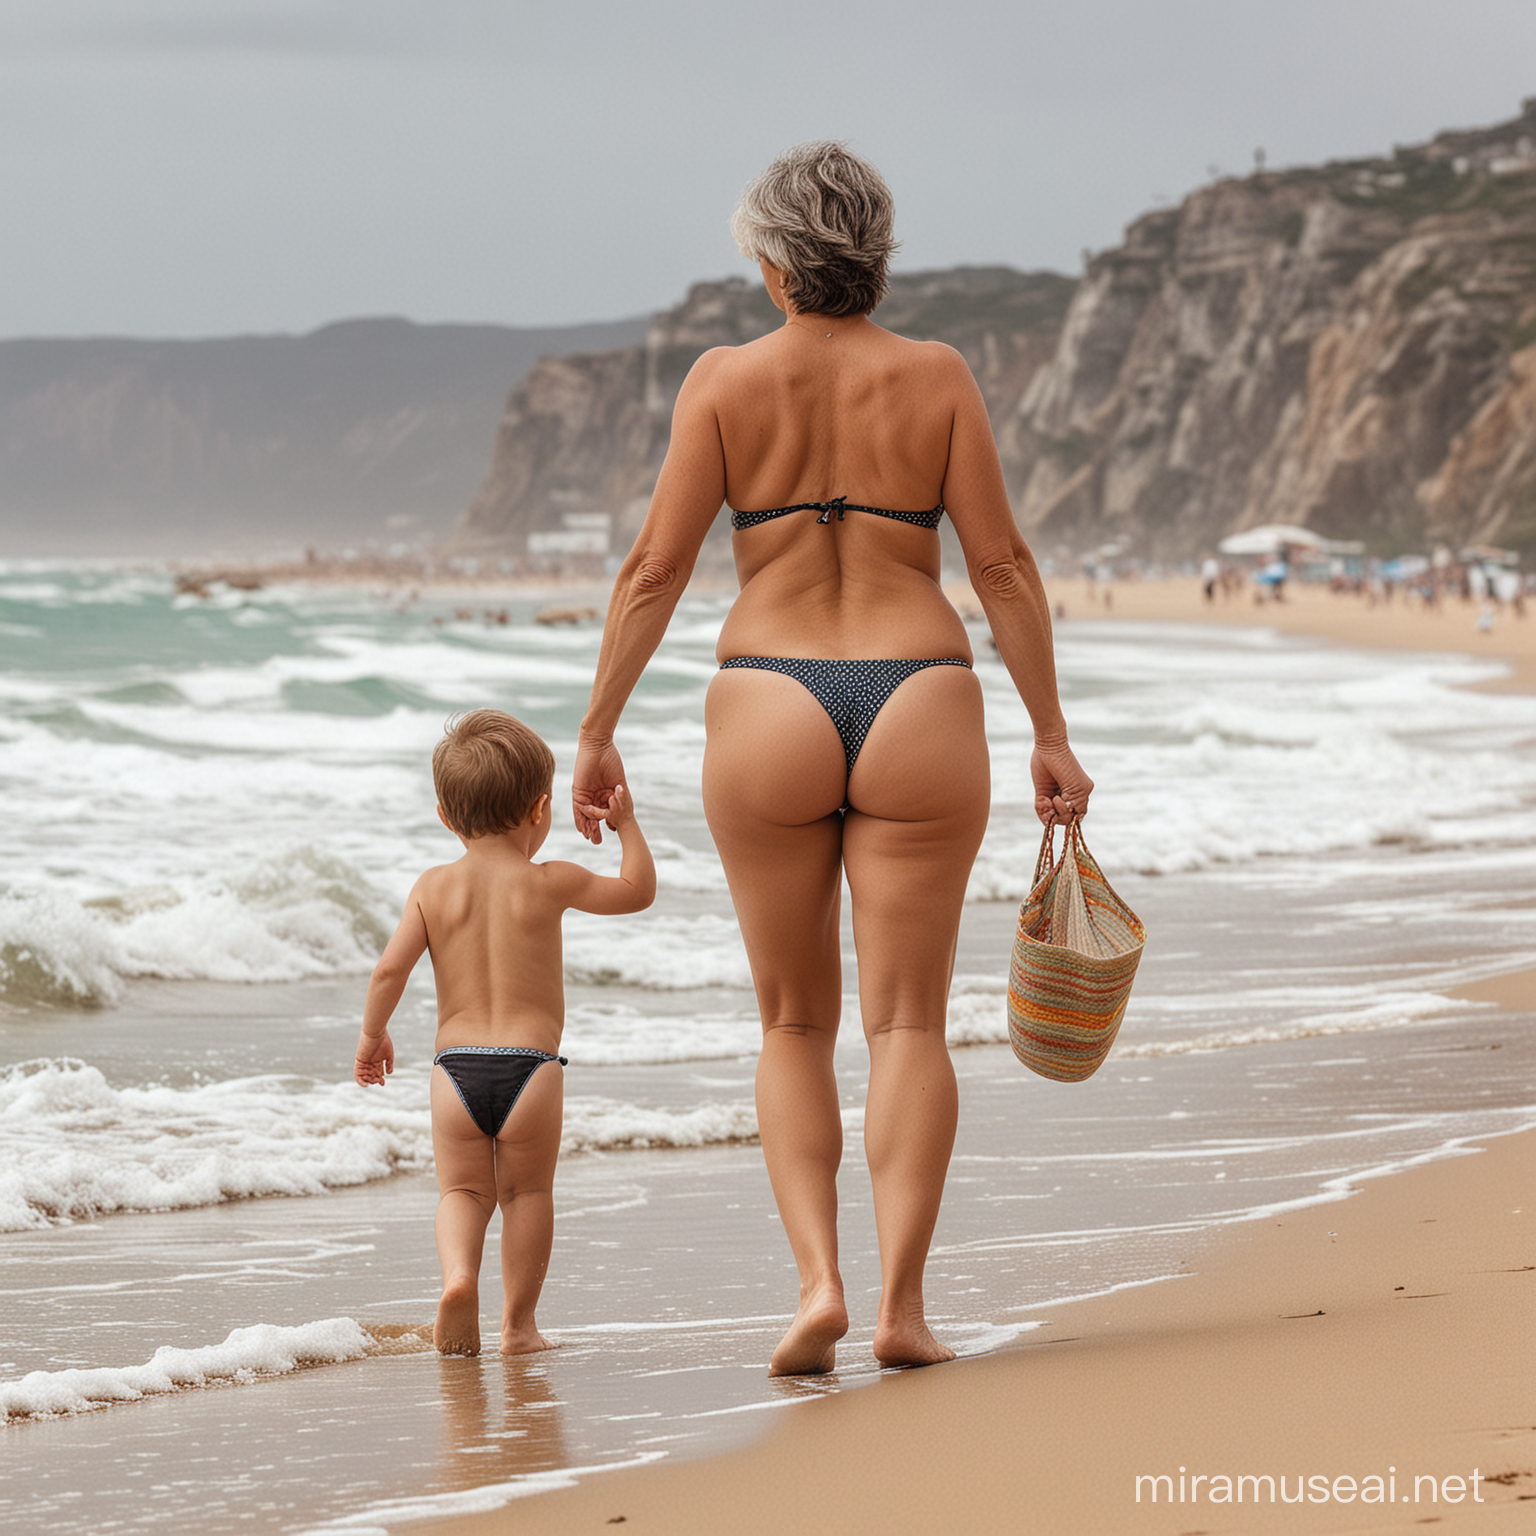 Mother and Son Walking on Beach Enjoying a Sunny Day Together